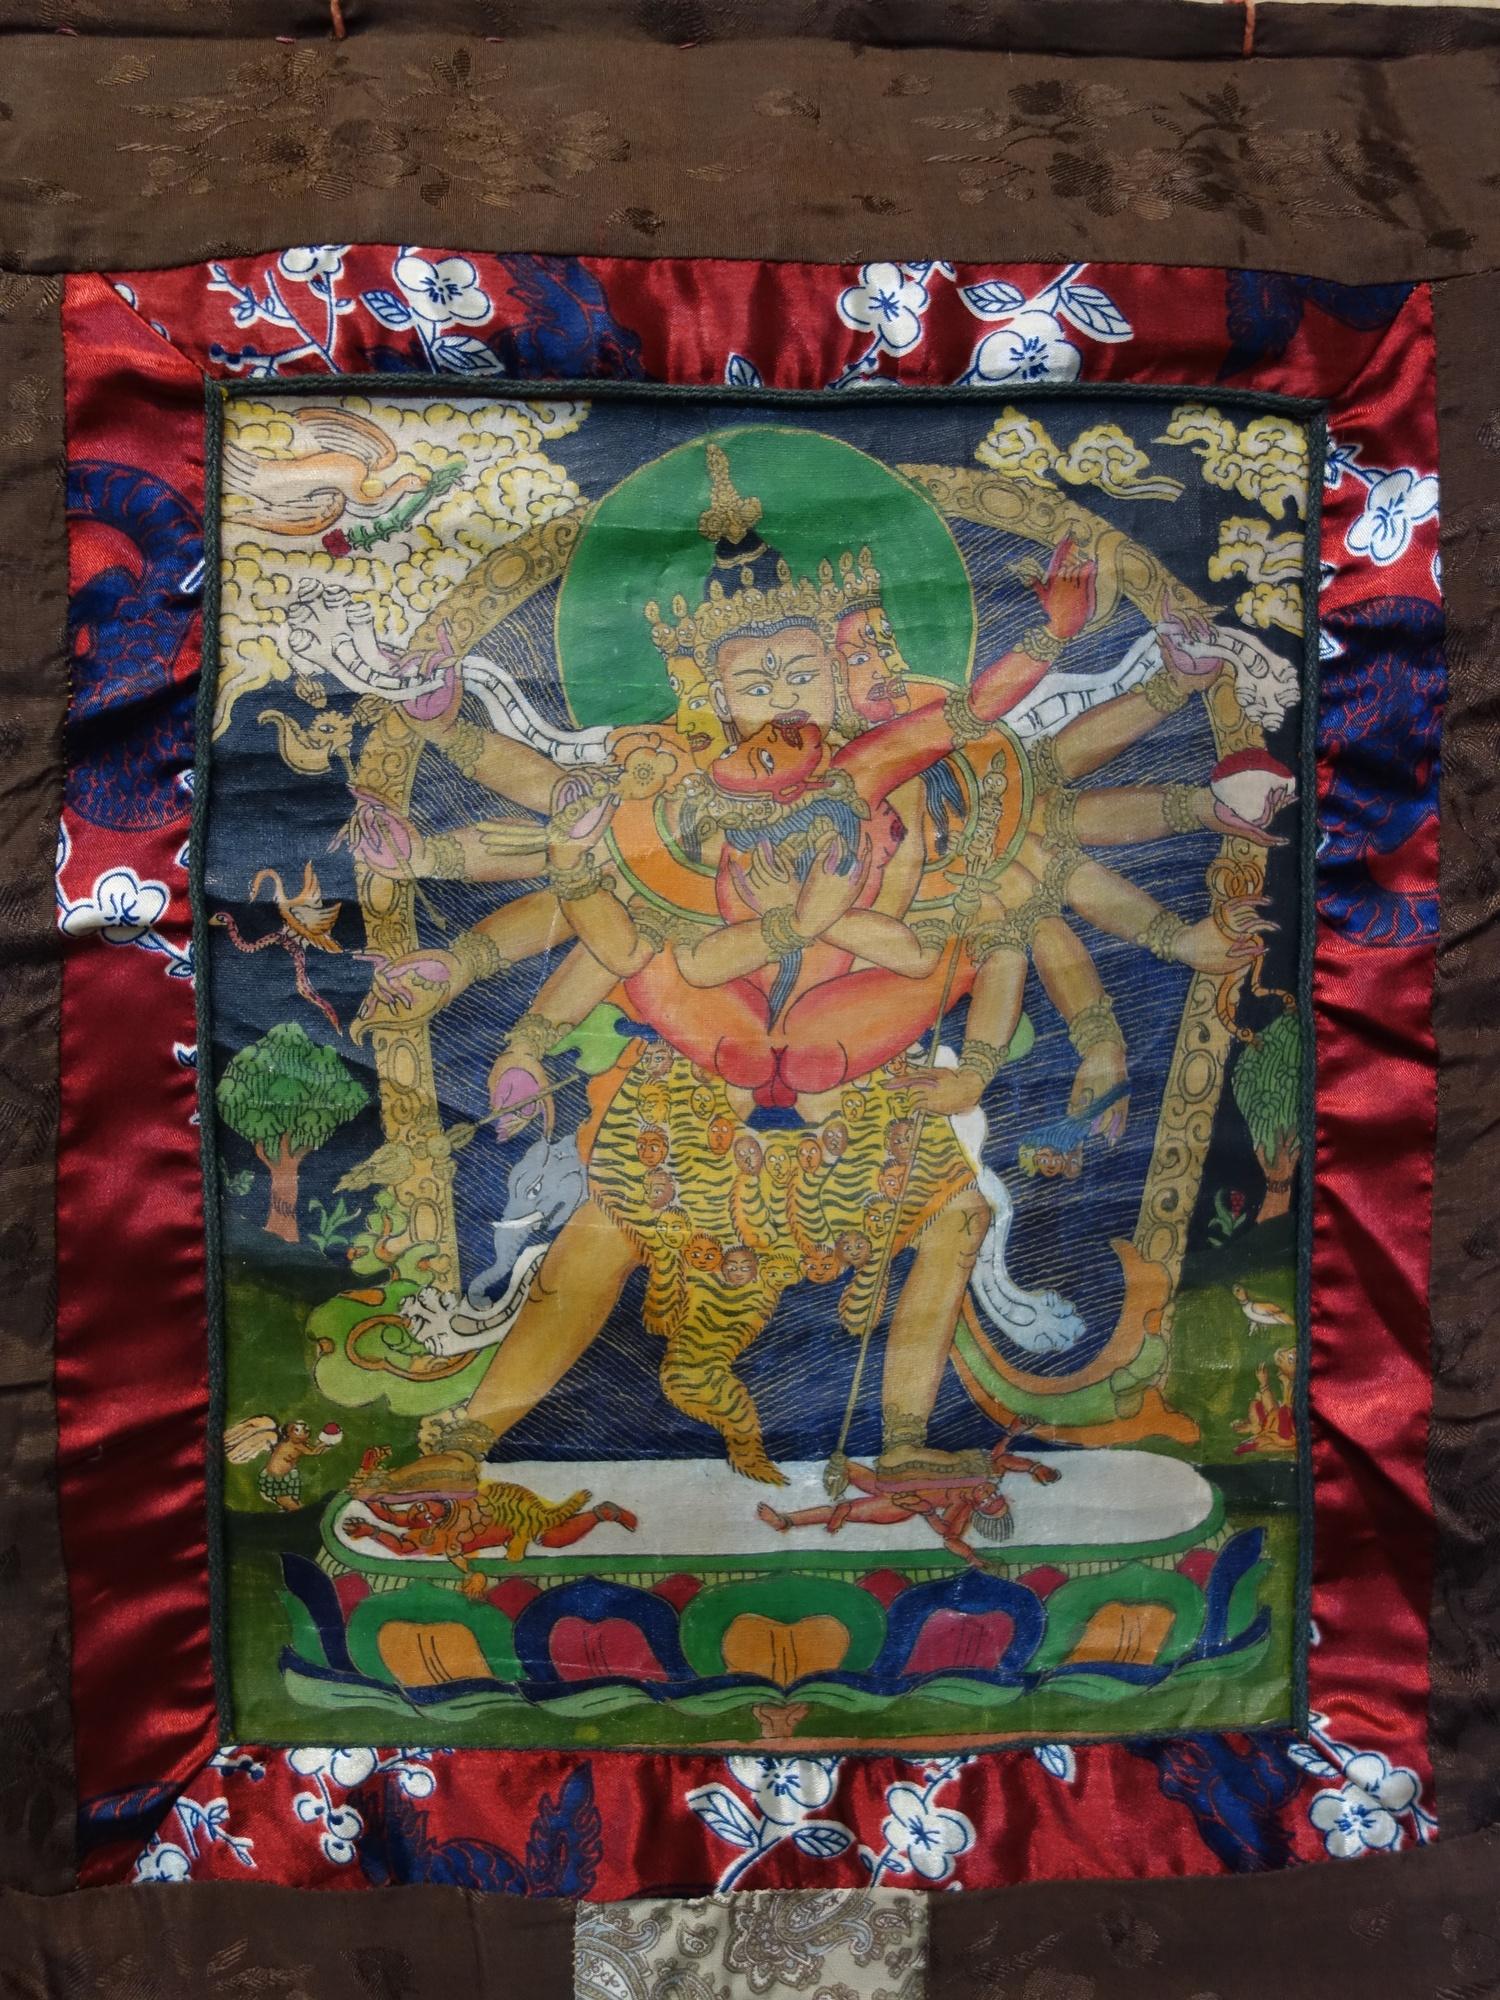 A hand-painted Tibetan Thangka depicting a deity in a landscape scene with animals, having script to - Image 6 of 7